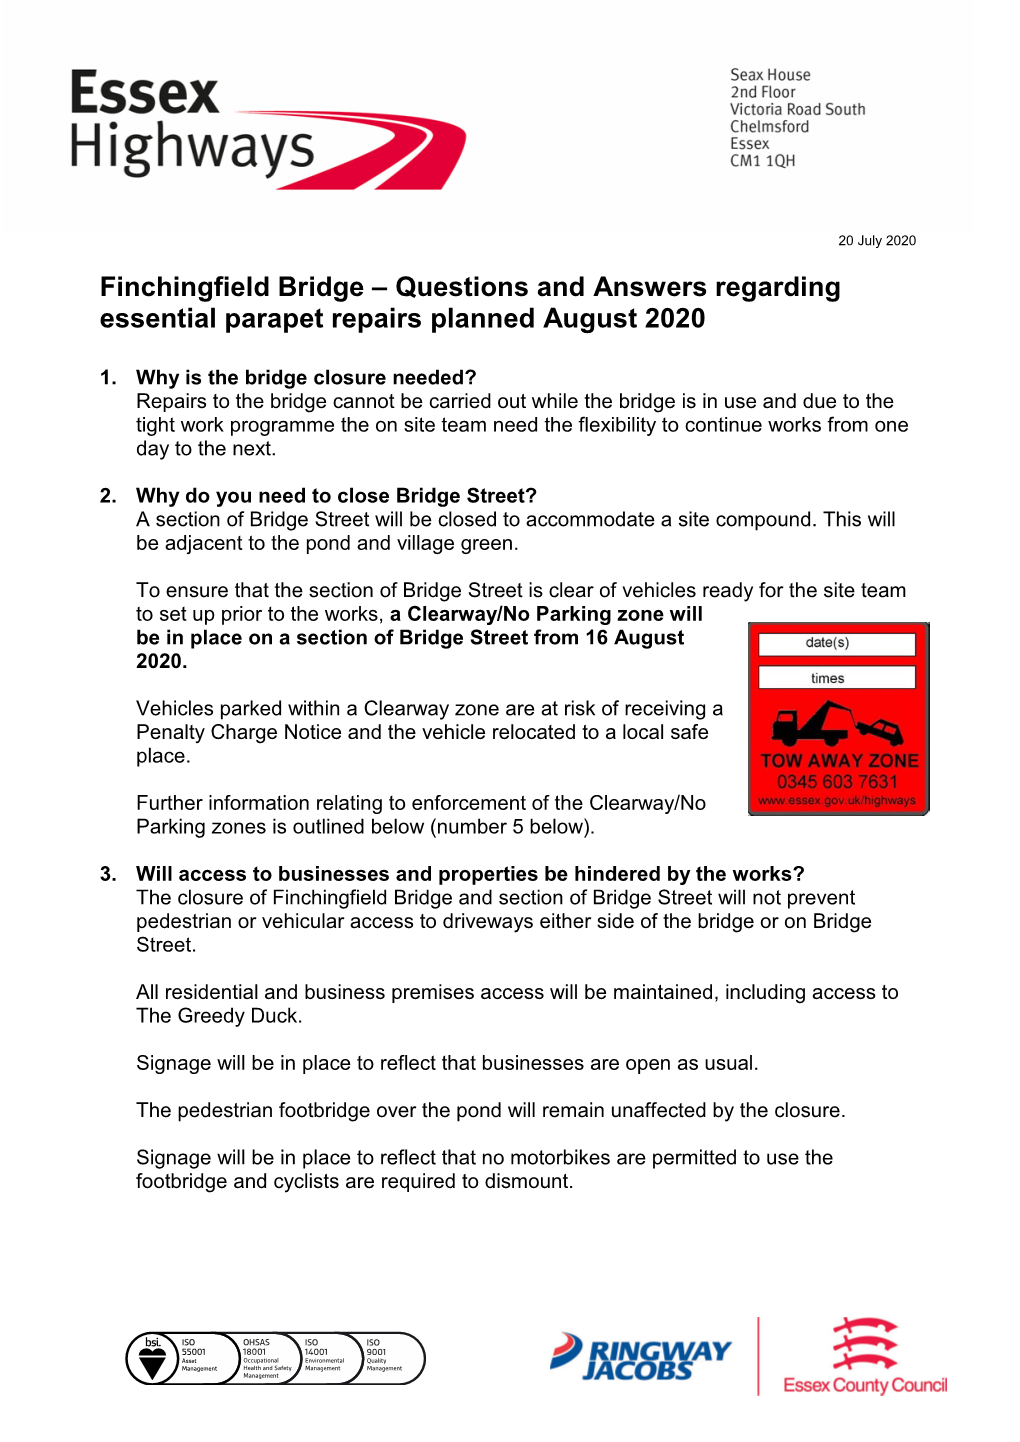 Finchingfield Bridge – Questions and Answers Regarding Essential Parapet Repairs Planned August 2020